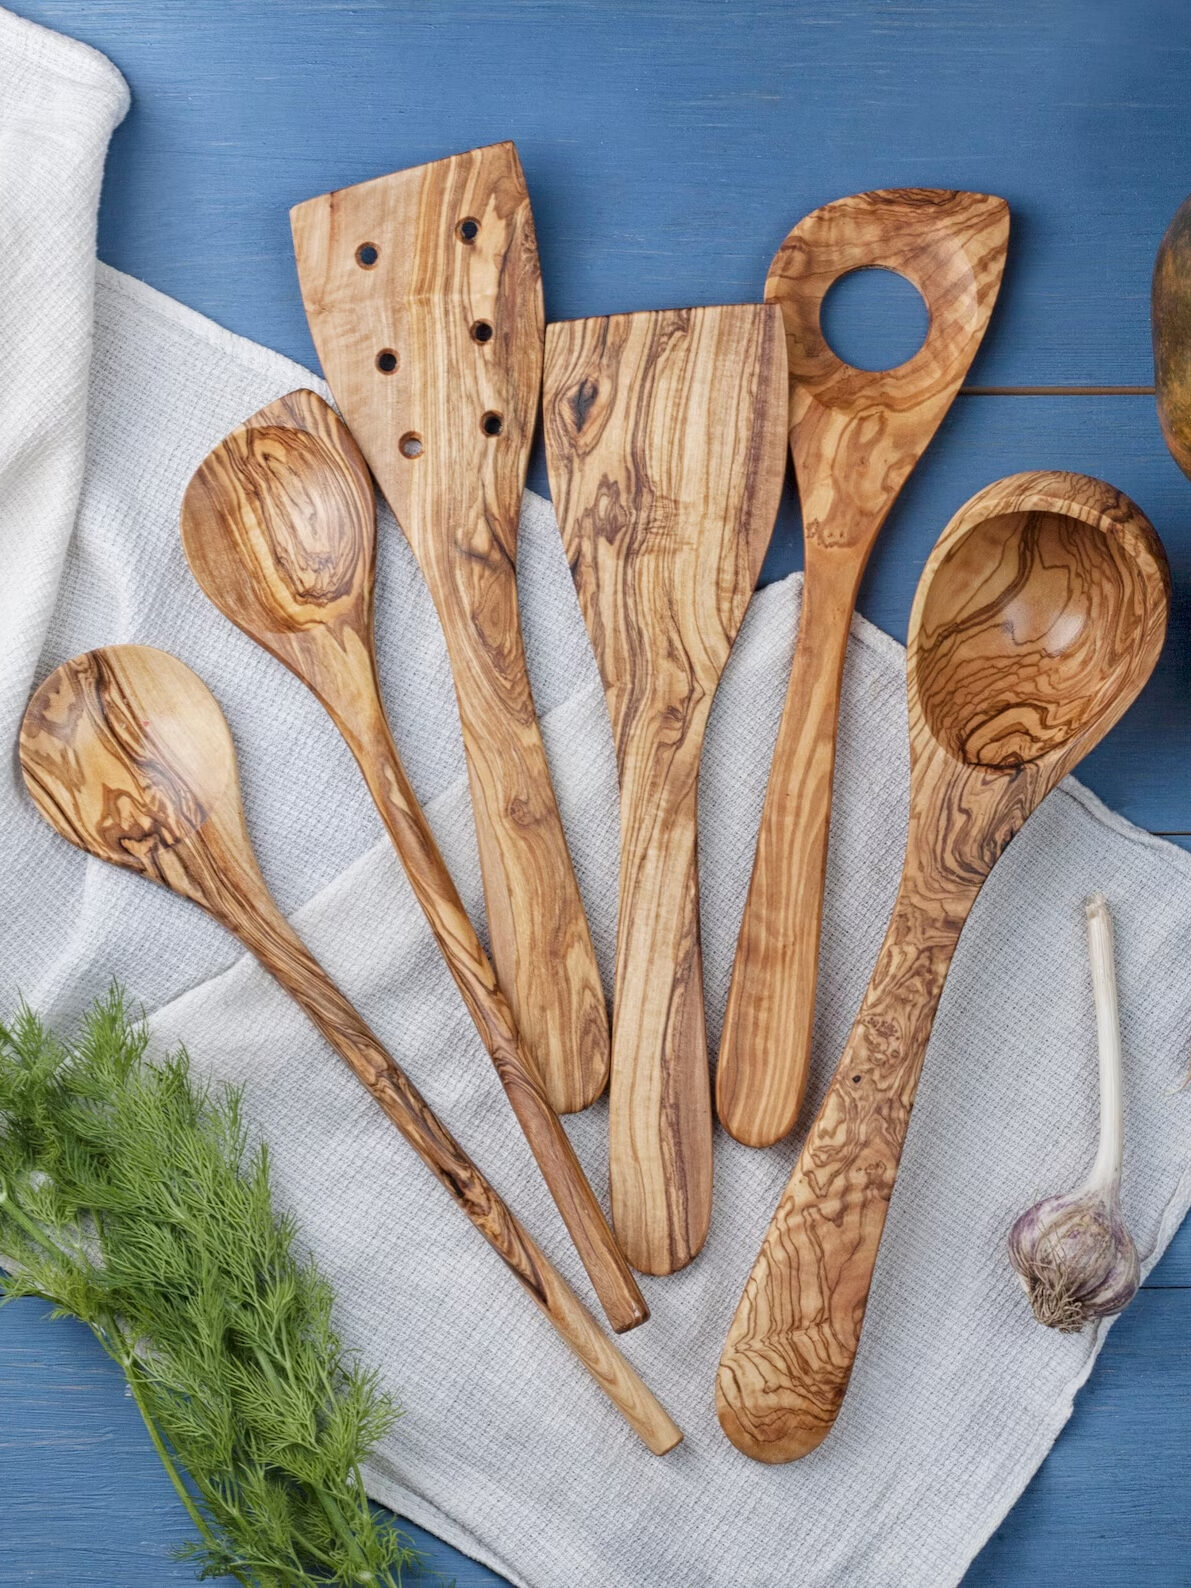 PFAS-Free Wooden Cooking Utensils from Forest Decor Shop